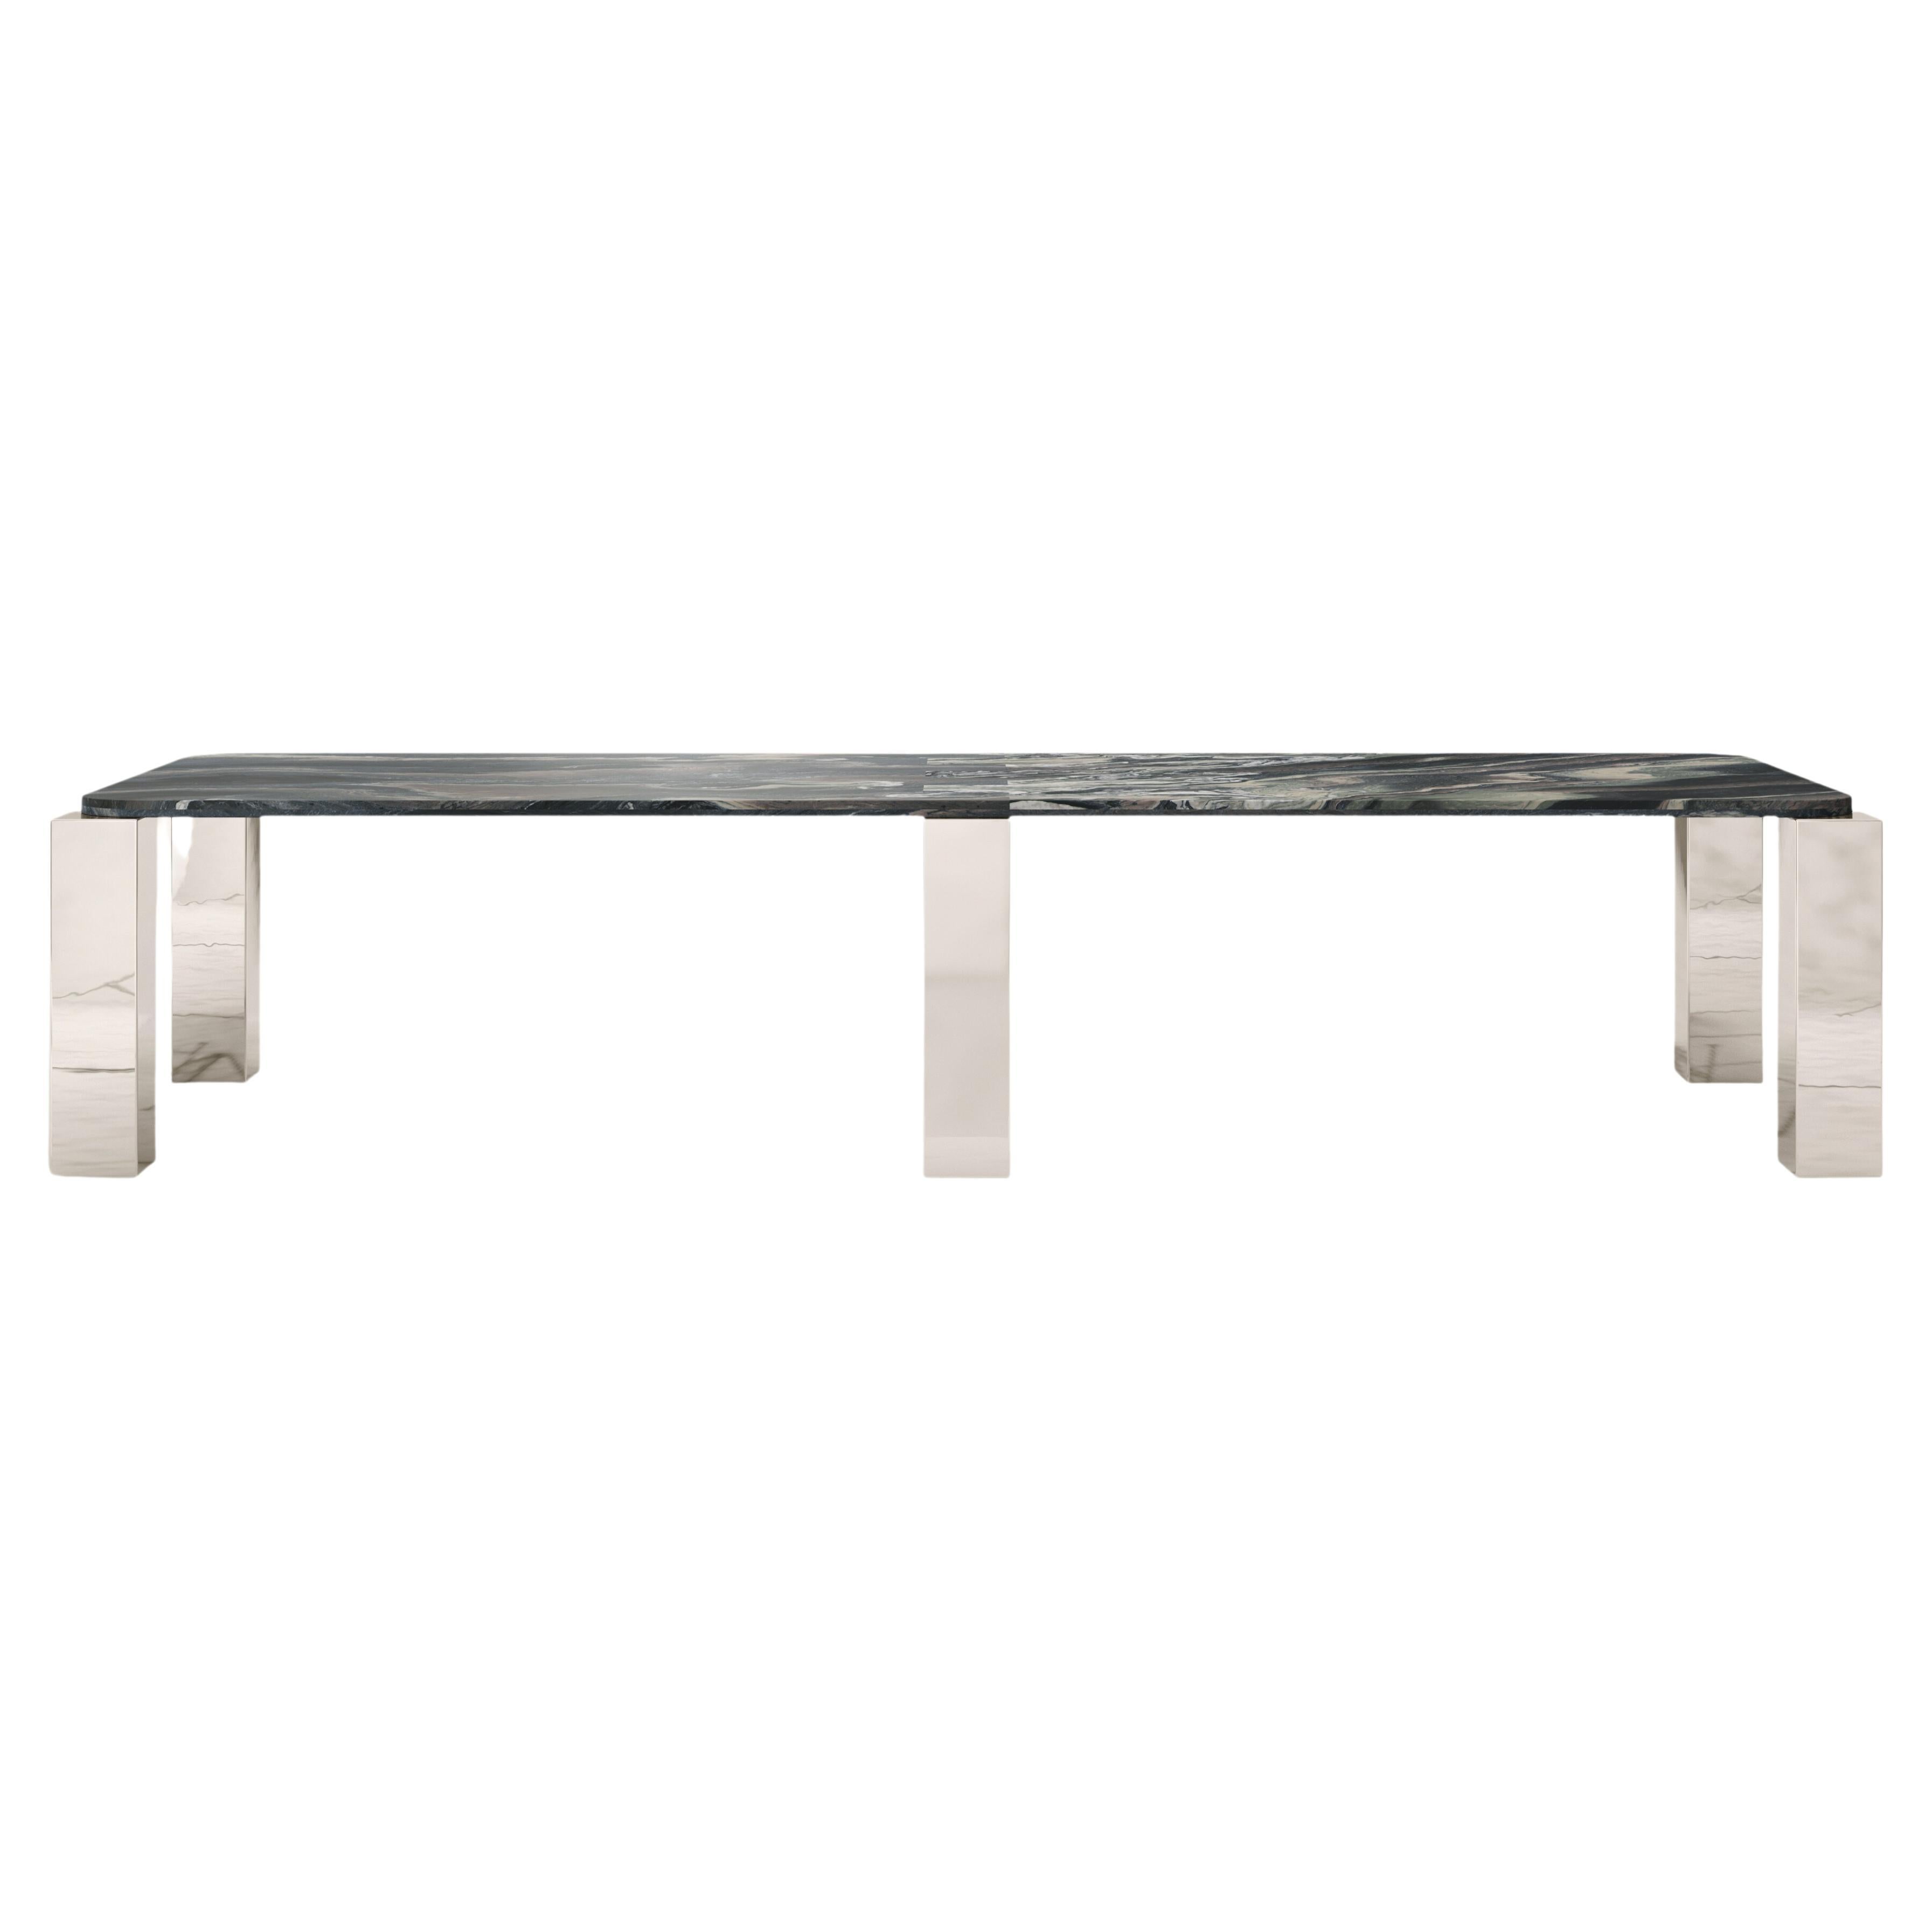 FORM(LA) Cubo Rectangle Dining Table 146”L x 50”W x 30”H Ondulato Marble/Chrome For Sale